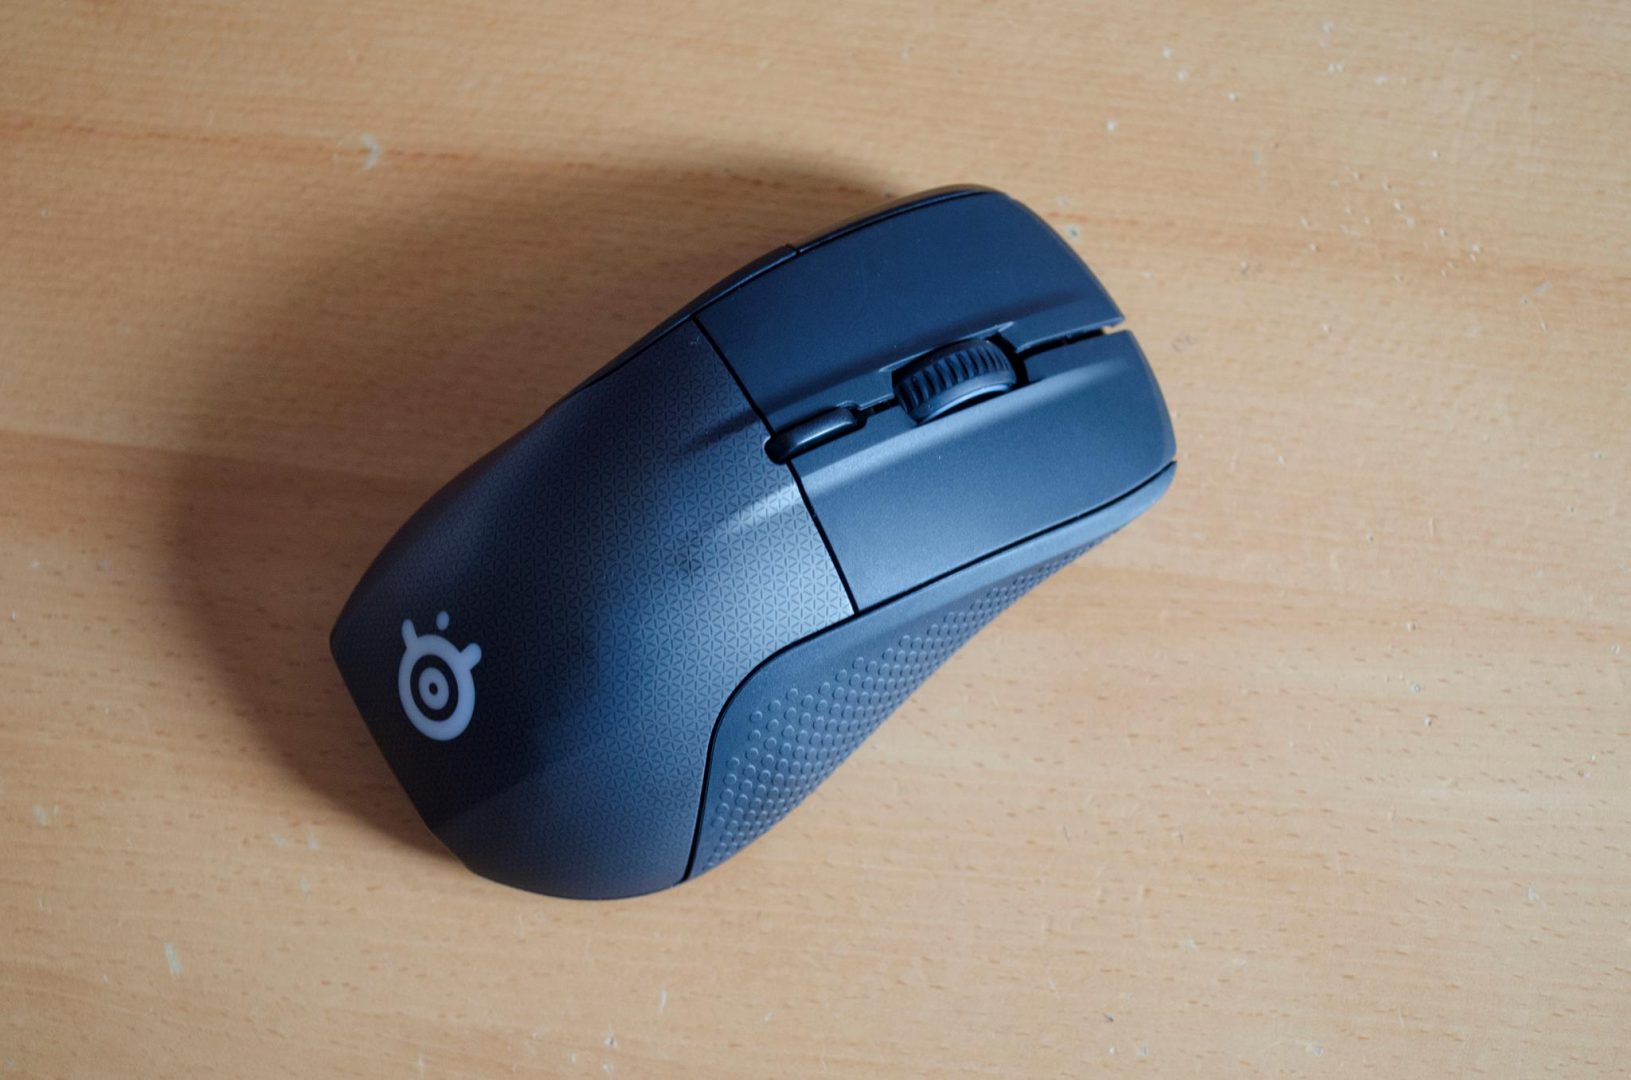 SteelSeries Rival 700 Gaming Mouse Review